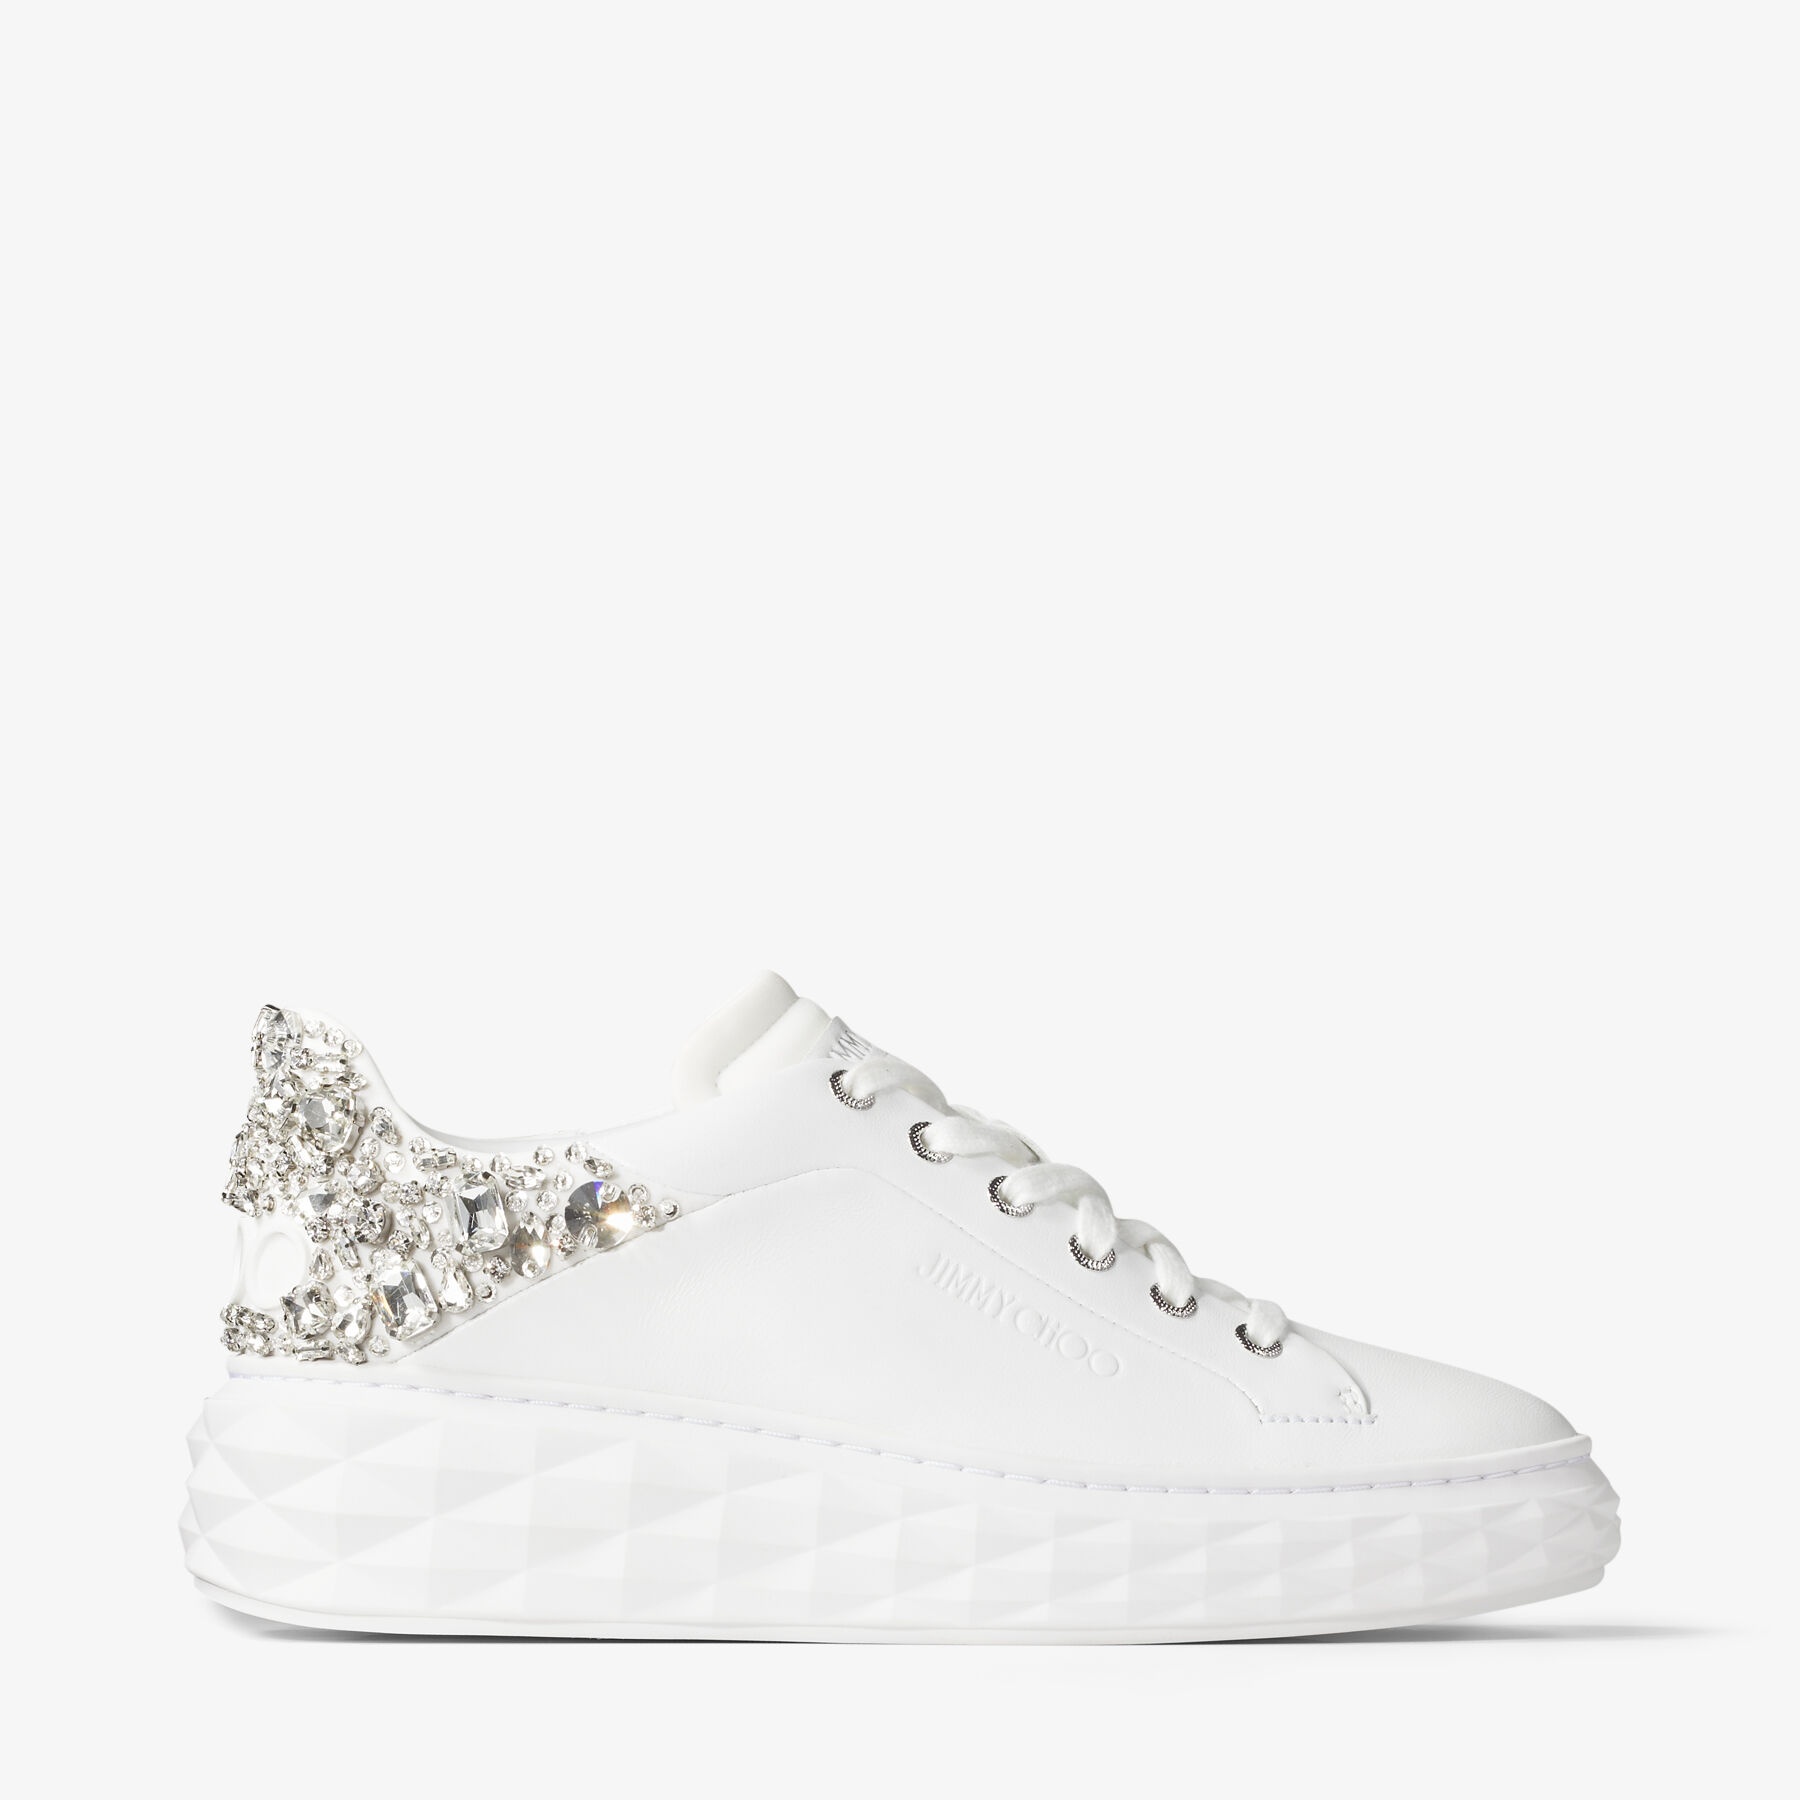 Diamond Maxi/f Ii
White and Silver Nappa Leather Trainers with Crystals - 1